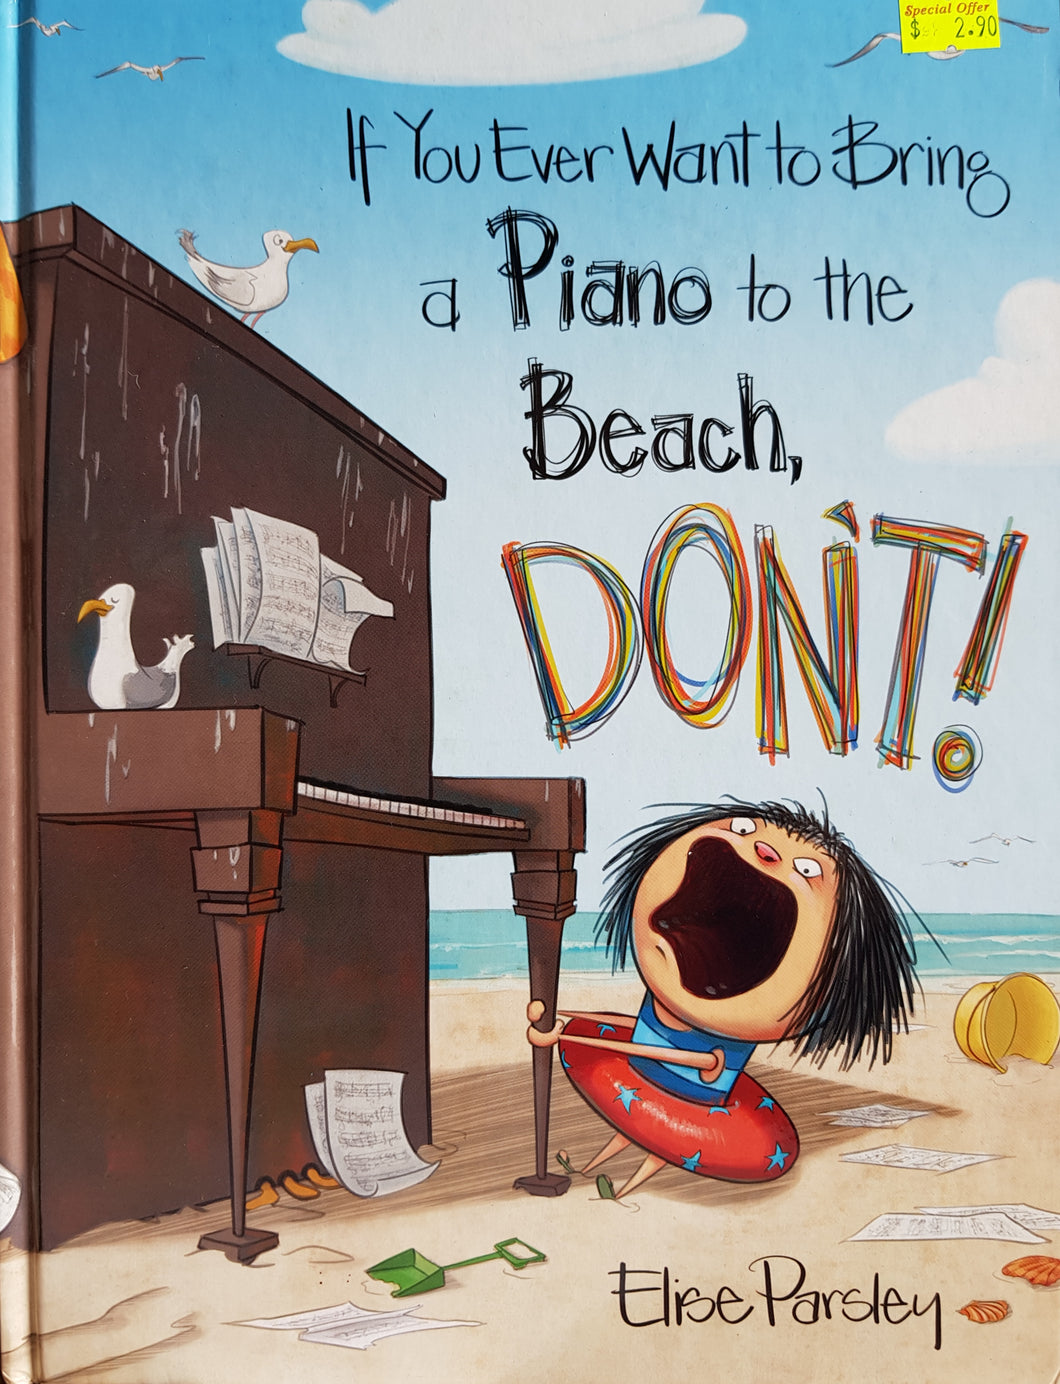 If You Ever Want To Bring A Piano To the Beach, Don't! - Elise Parsley